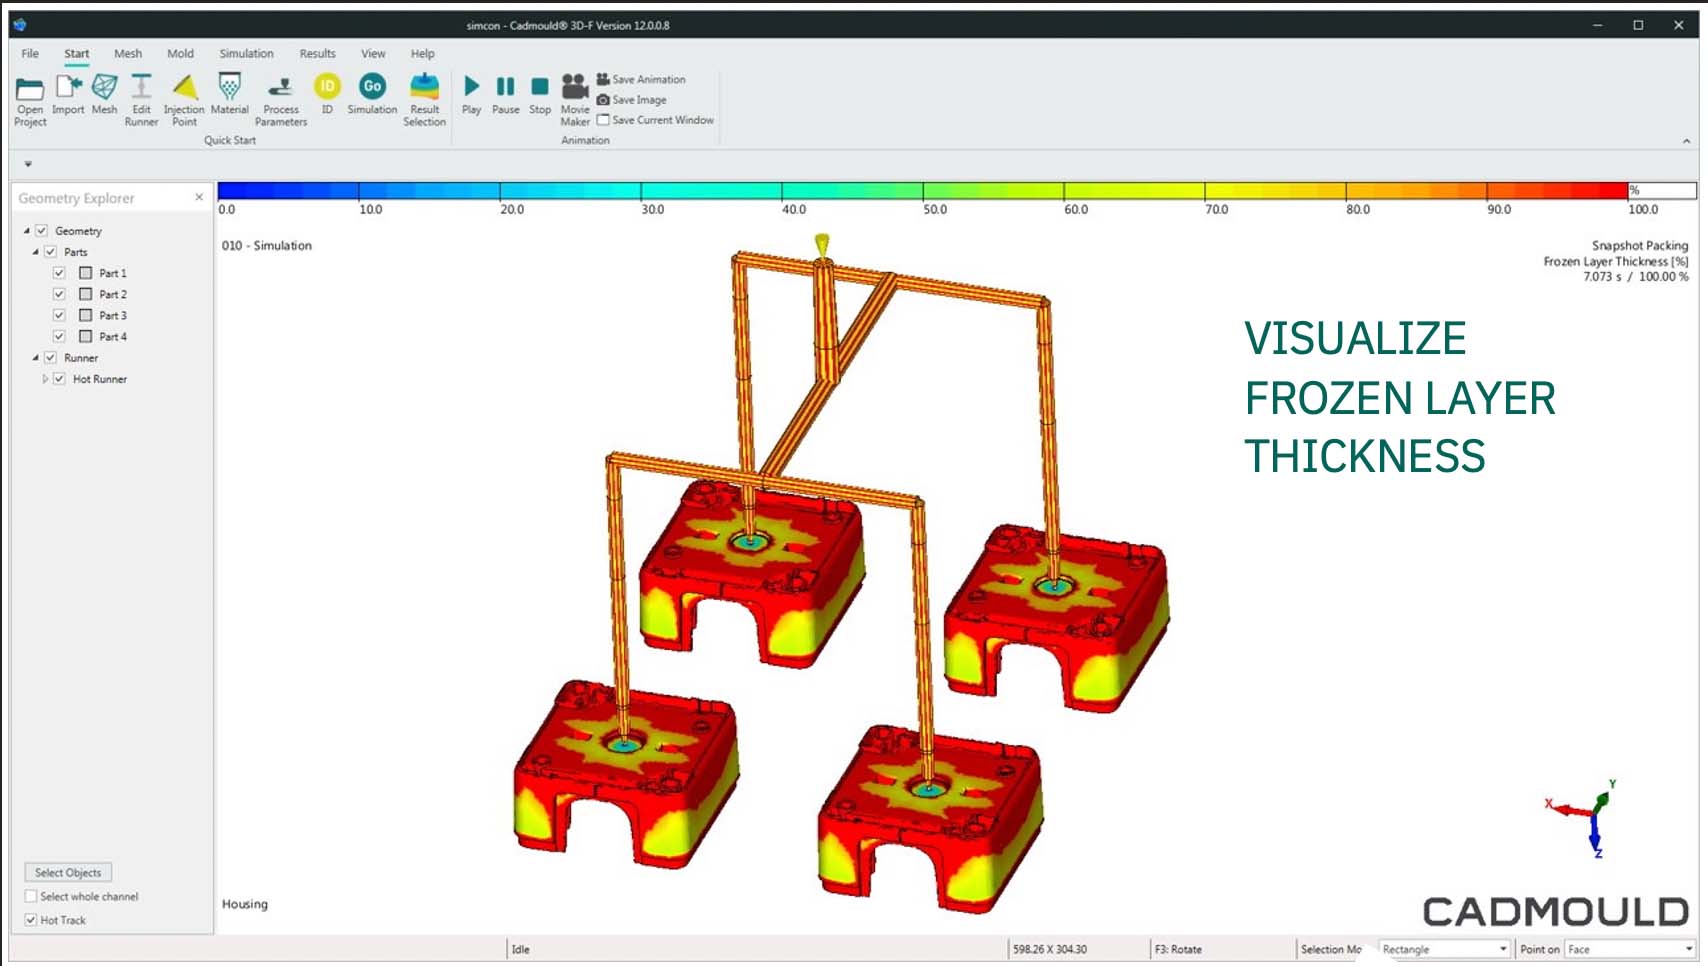 CADMOULD Pack: Visualize frozen layer thickness